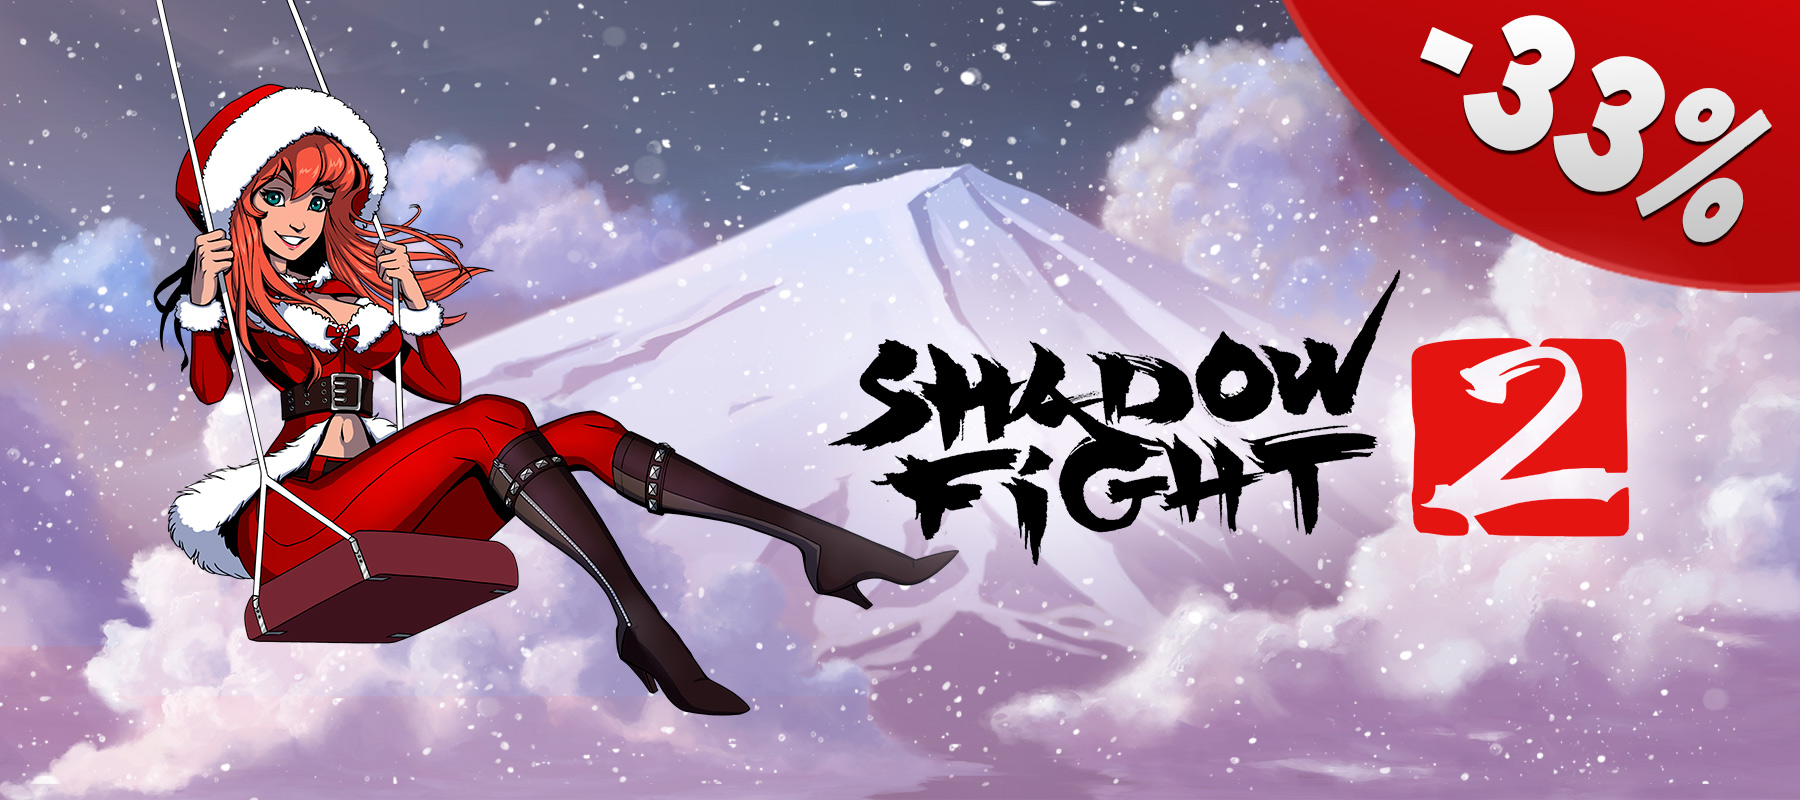 Shadow Fight 3 on X: "Shadow Fight 2 Switch Edition is on XMAS sale now,  yay! https://t.co/NK0vIRDuly #ShadowFight #Nintendo #NintendoSwitch  https://t.co/VCTdleYbts" / X